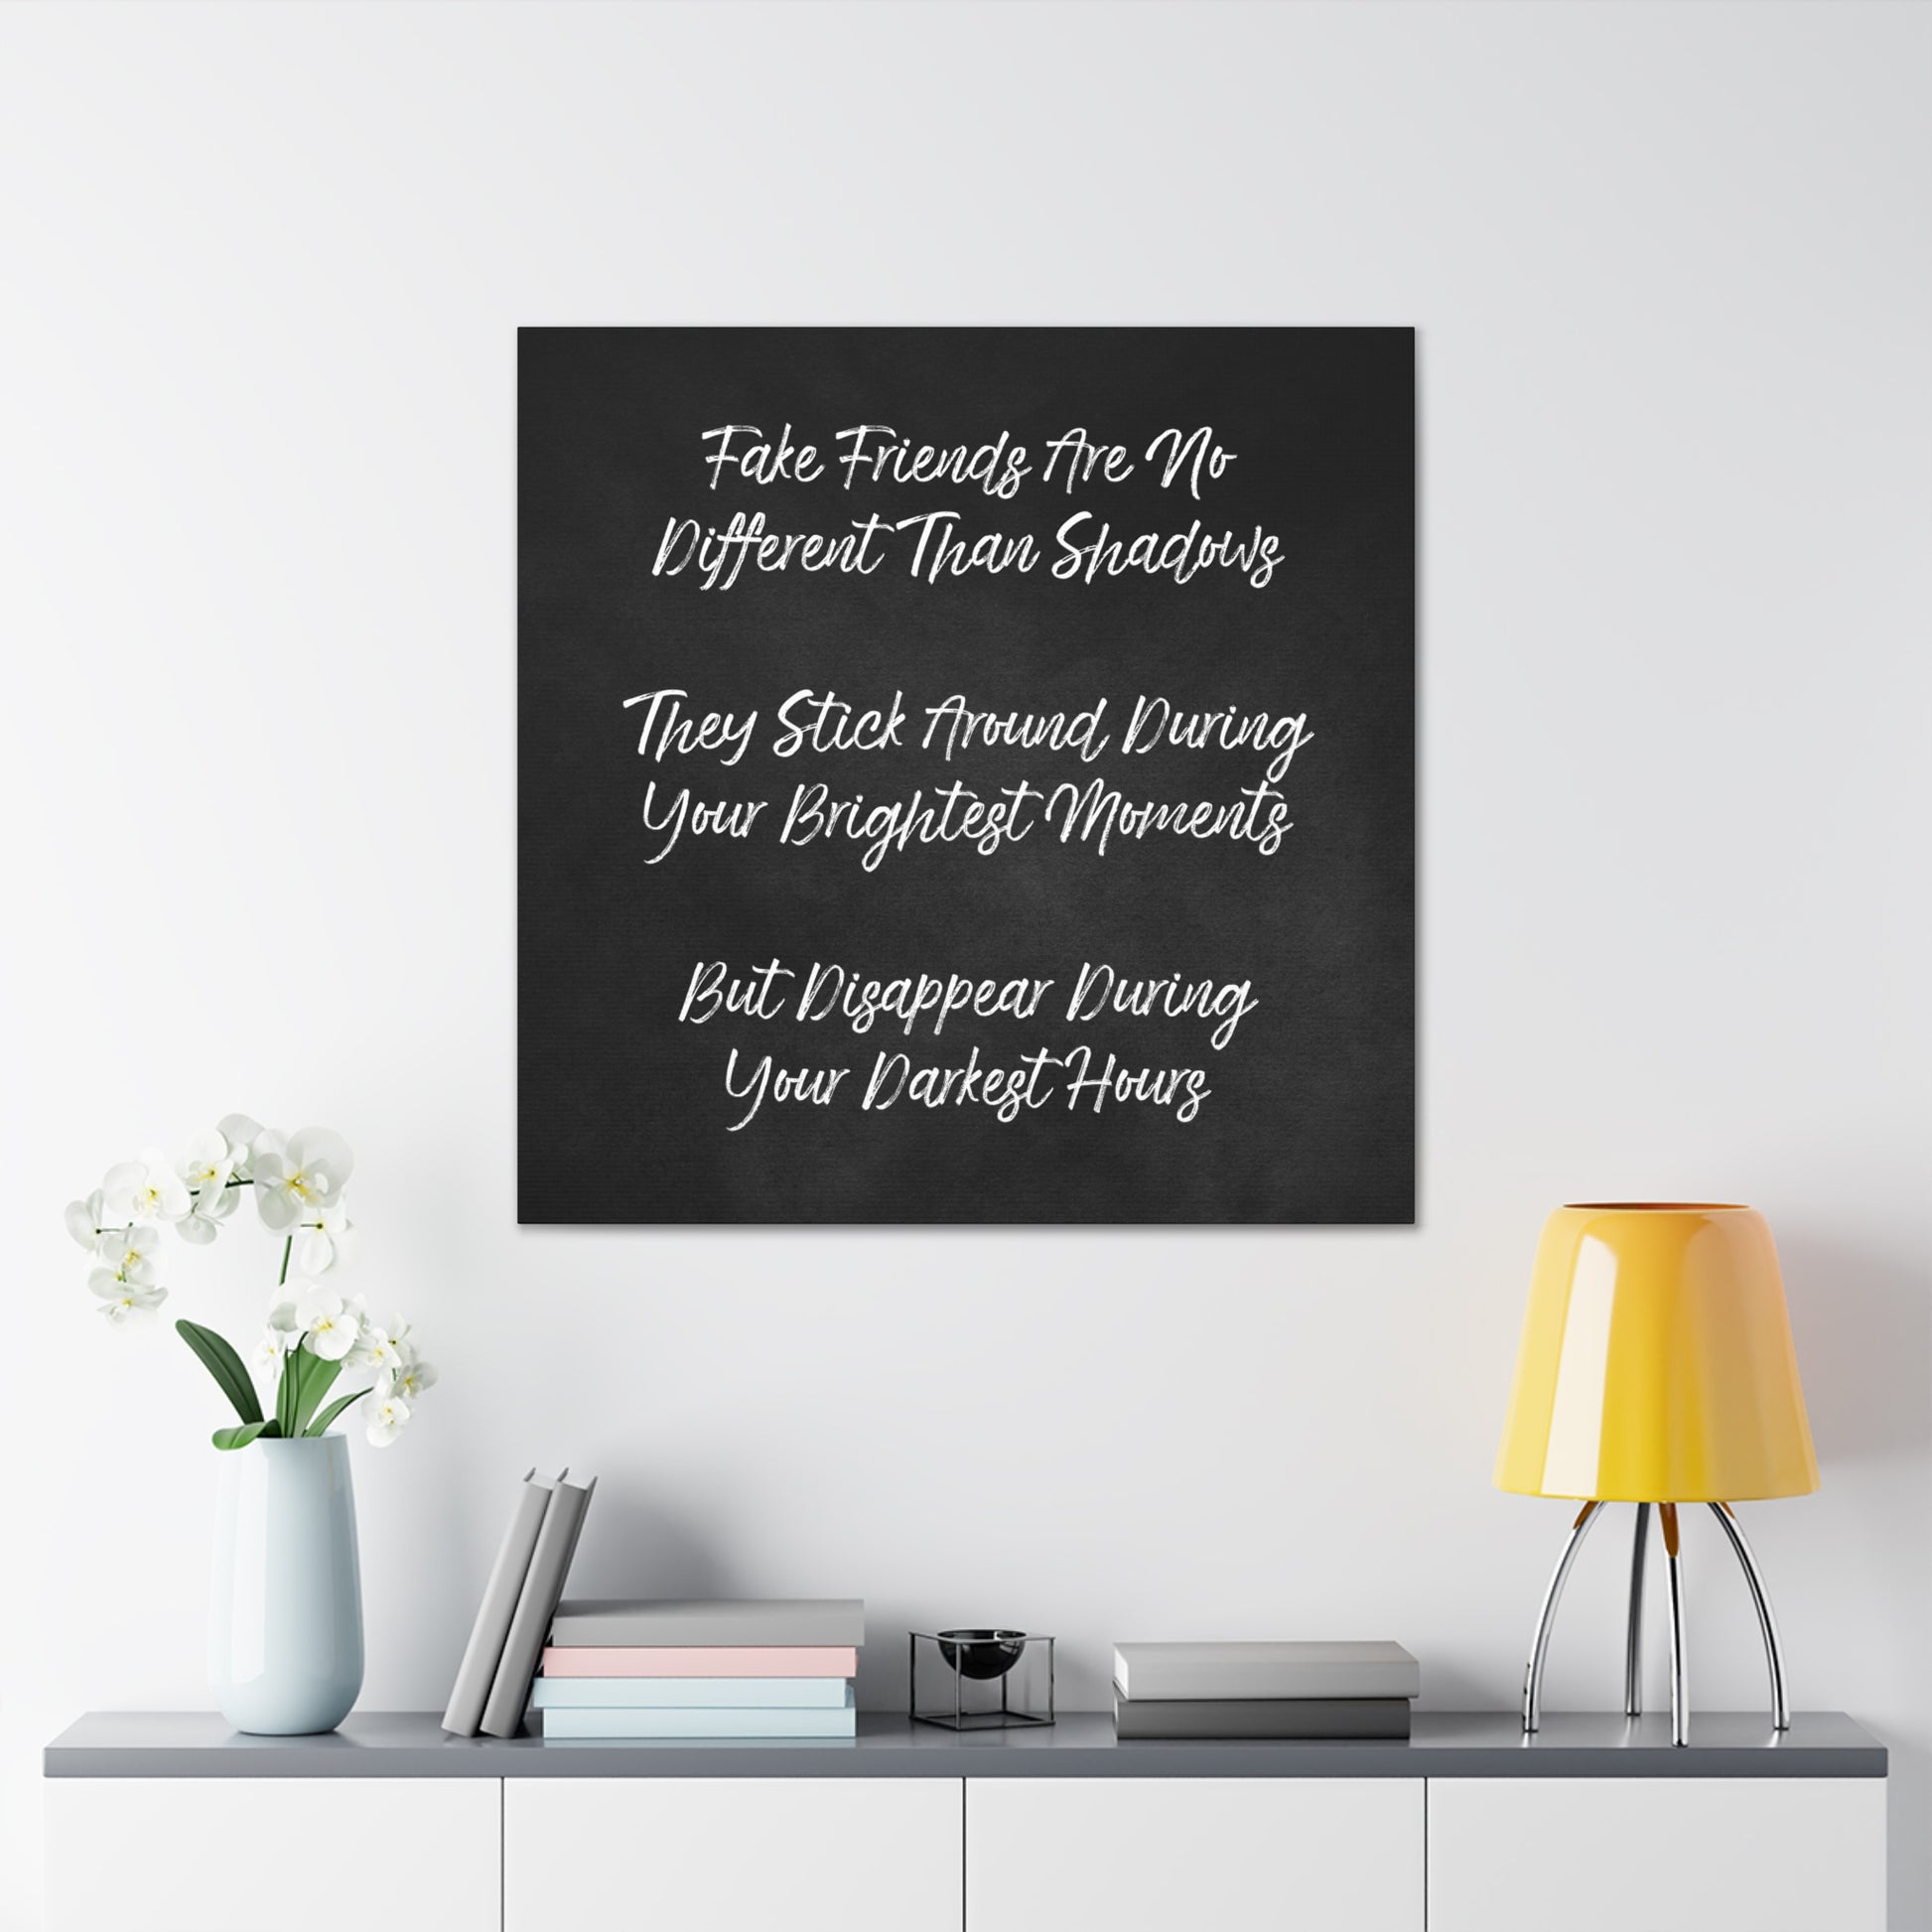 "Fake Friends" Wall Art - Weave Got Gifts - Unique Gifts You Won’t Find Anywhere Else!